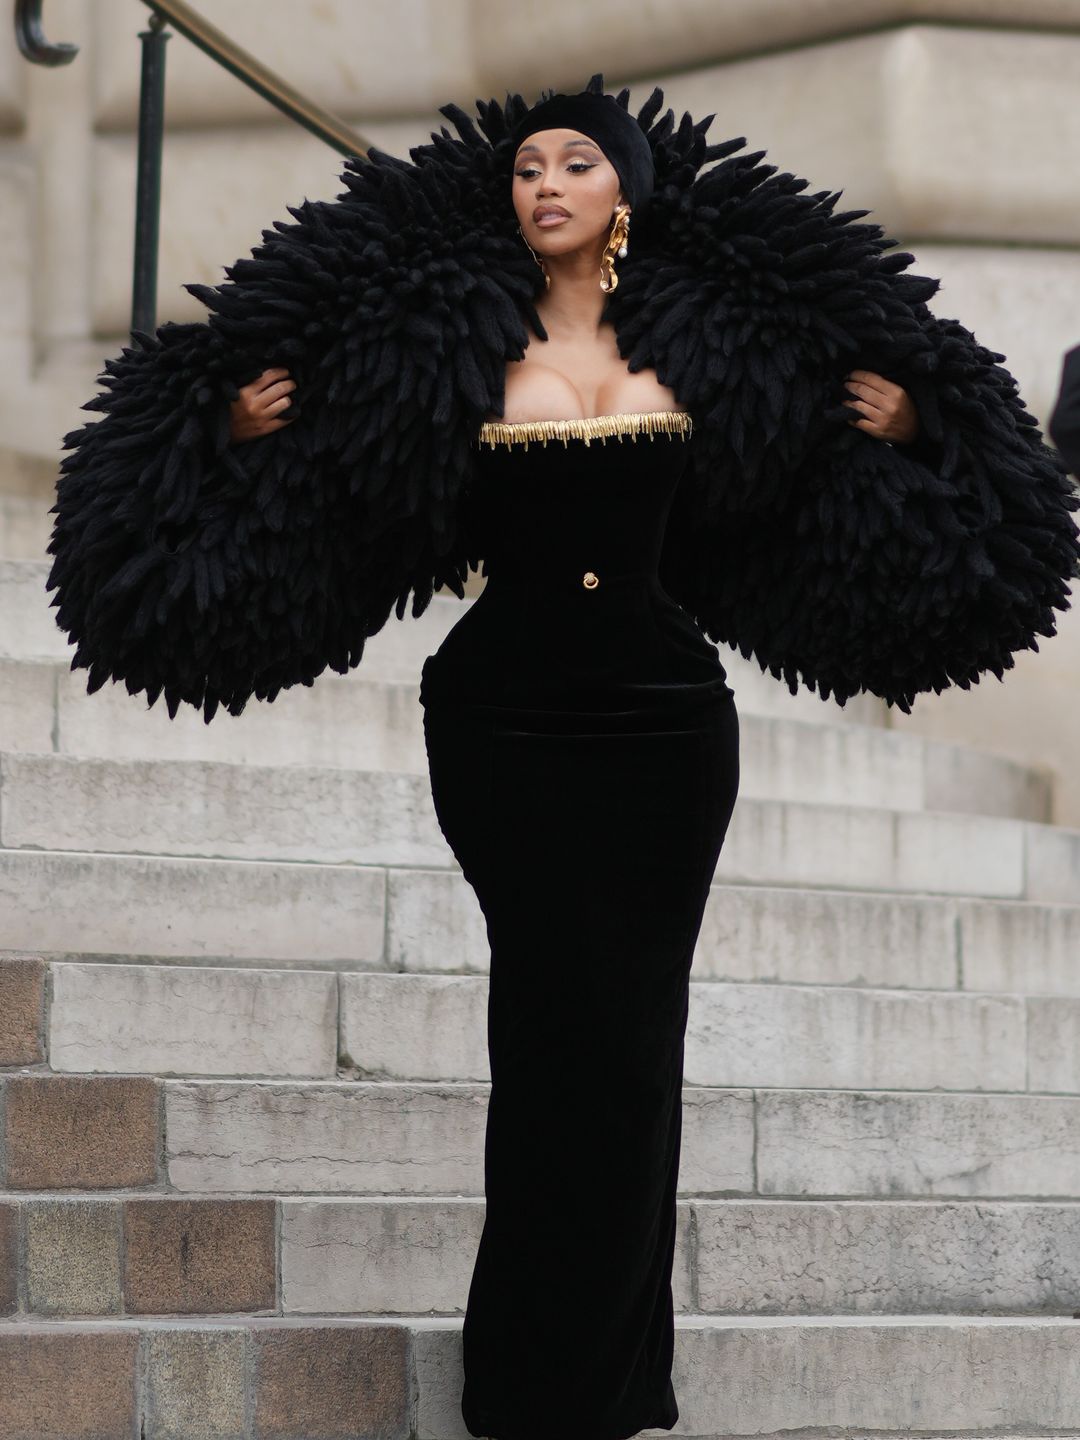 Cardi B wearing a black fitted dress and feathered cape